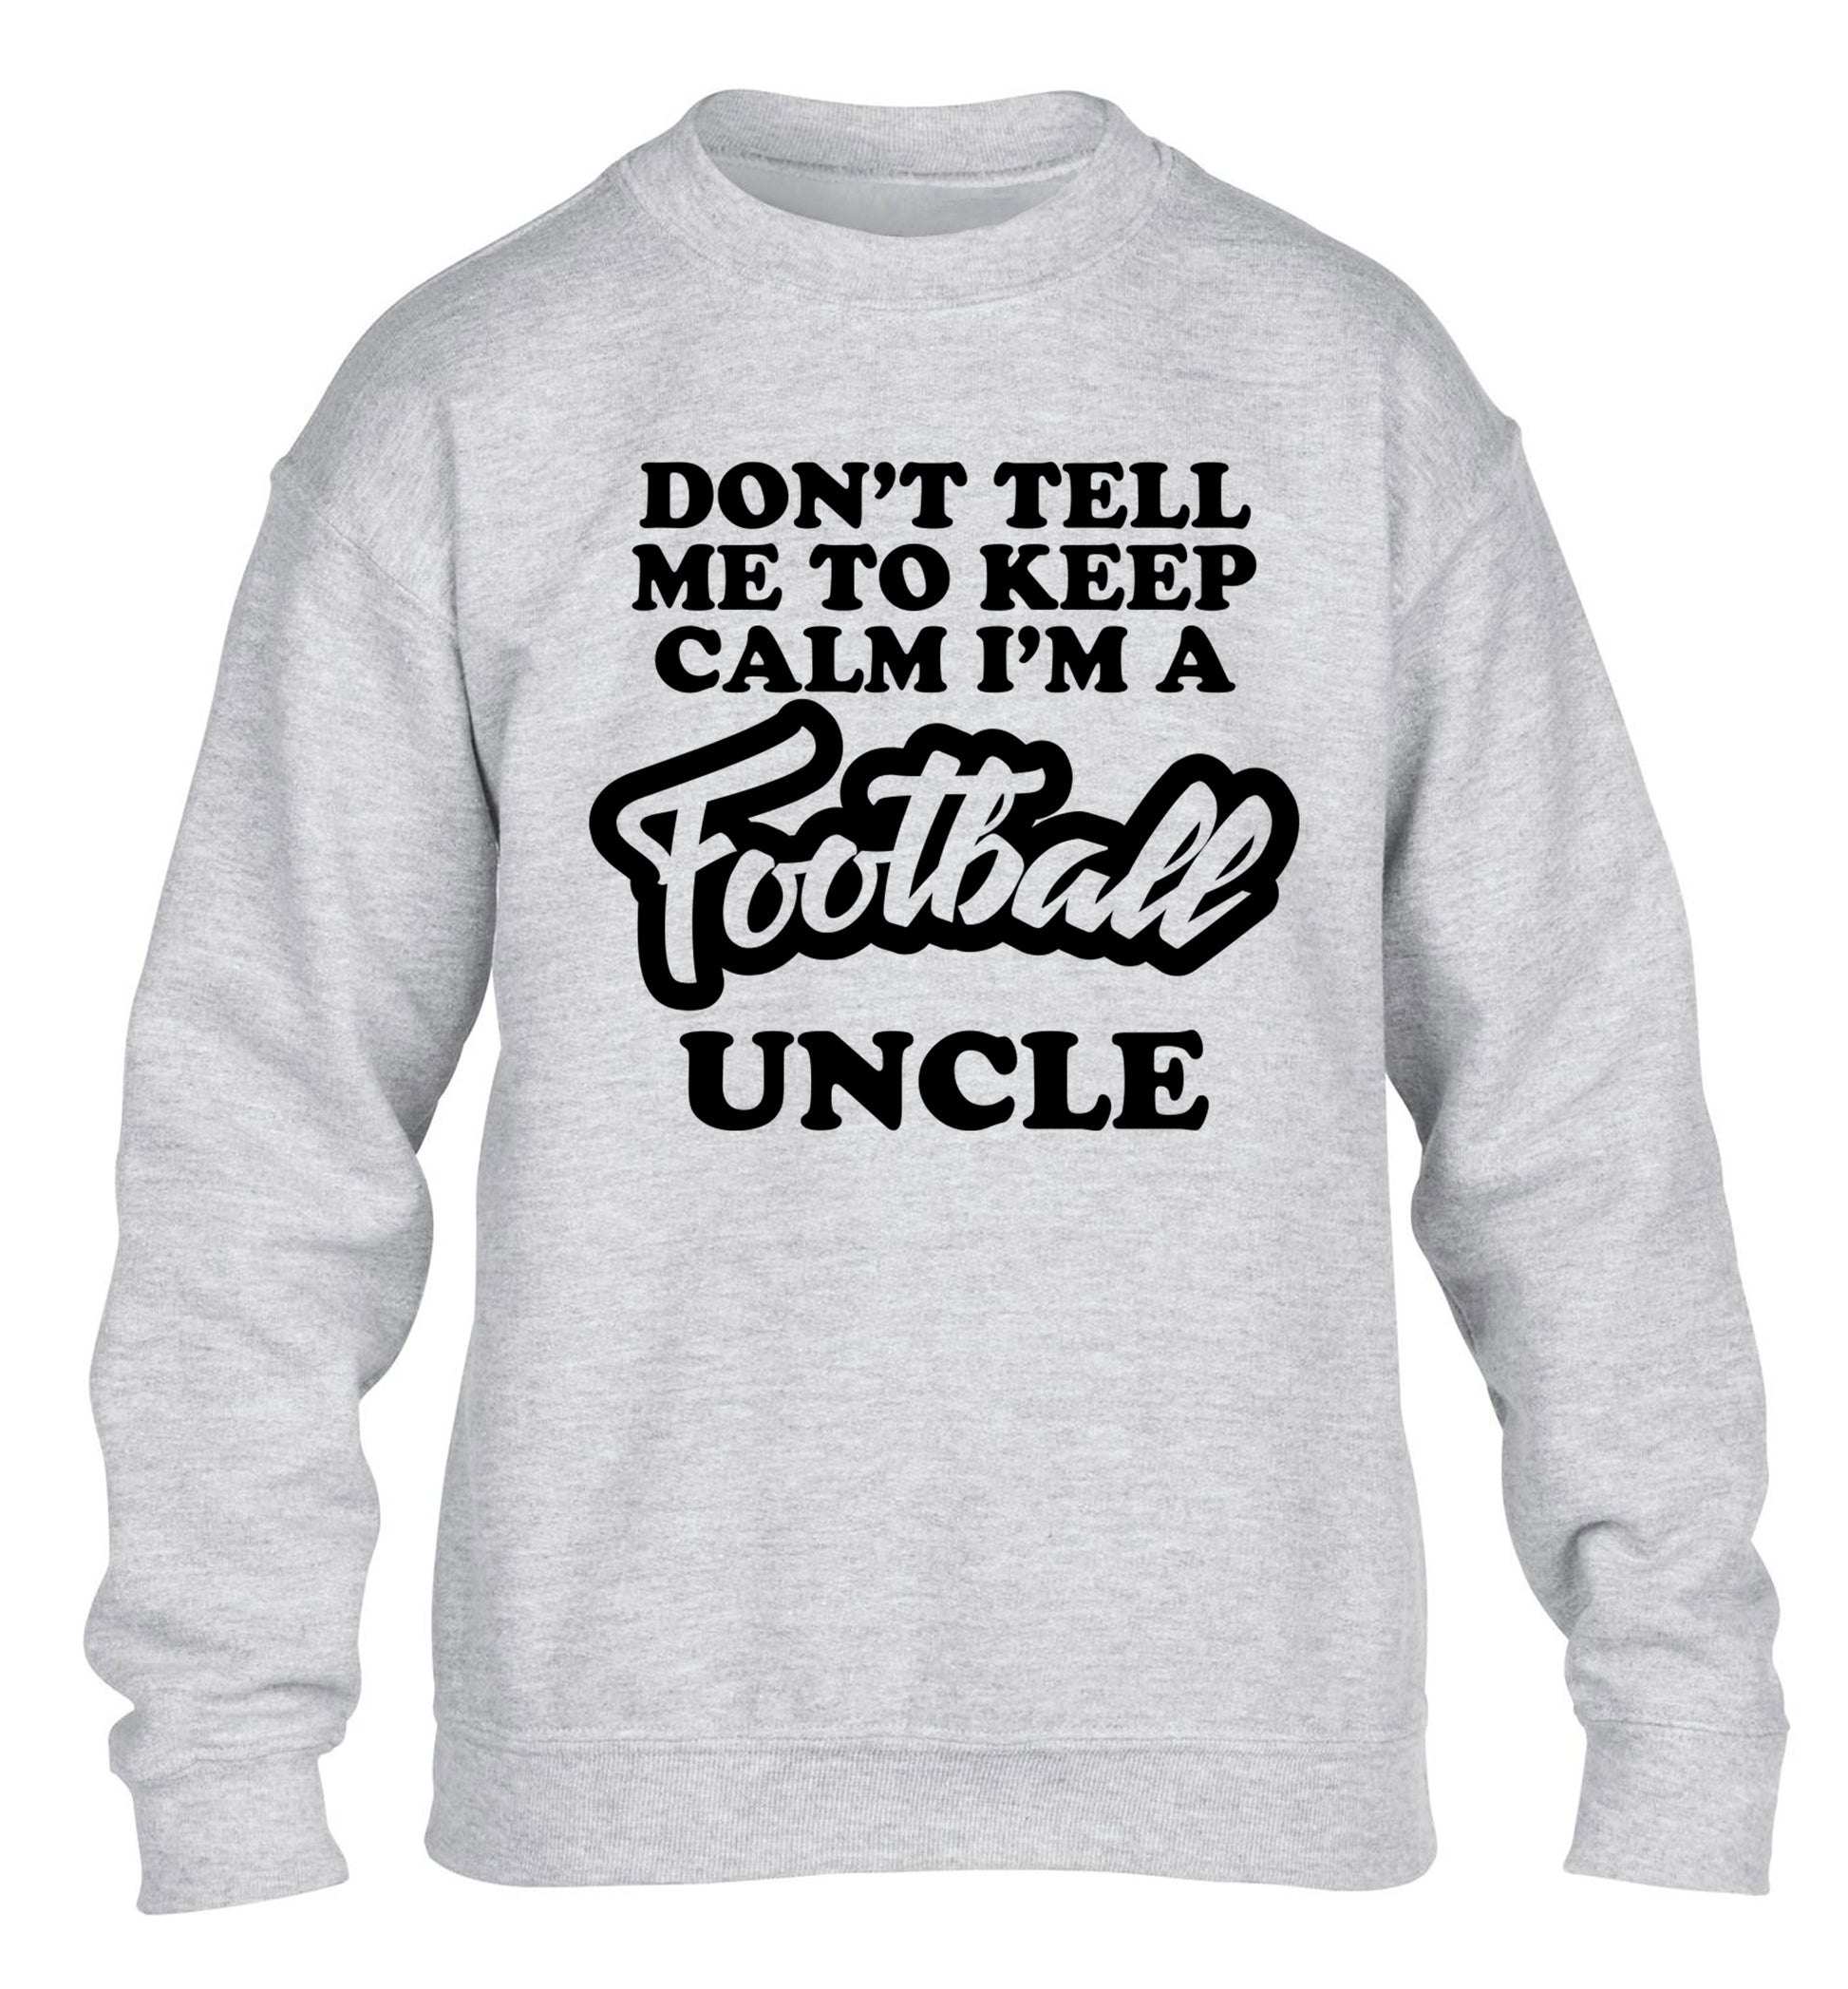 Worlds most amazing football uncle children's grey sweater 12-14 Years